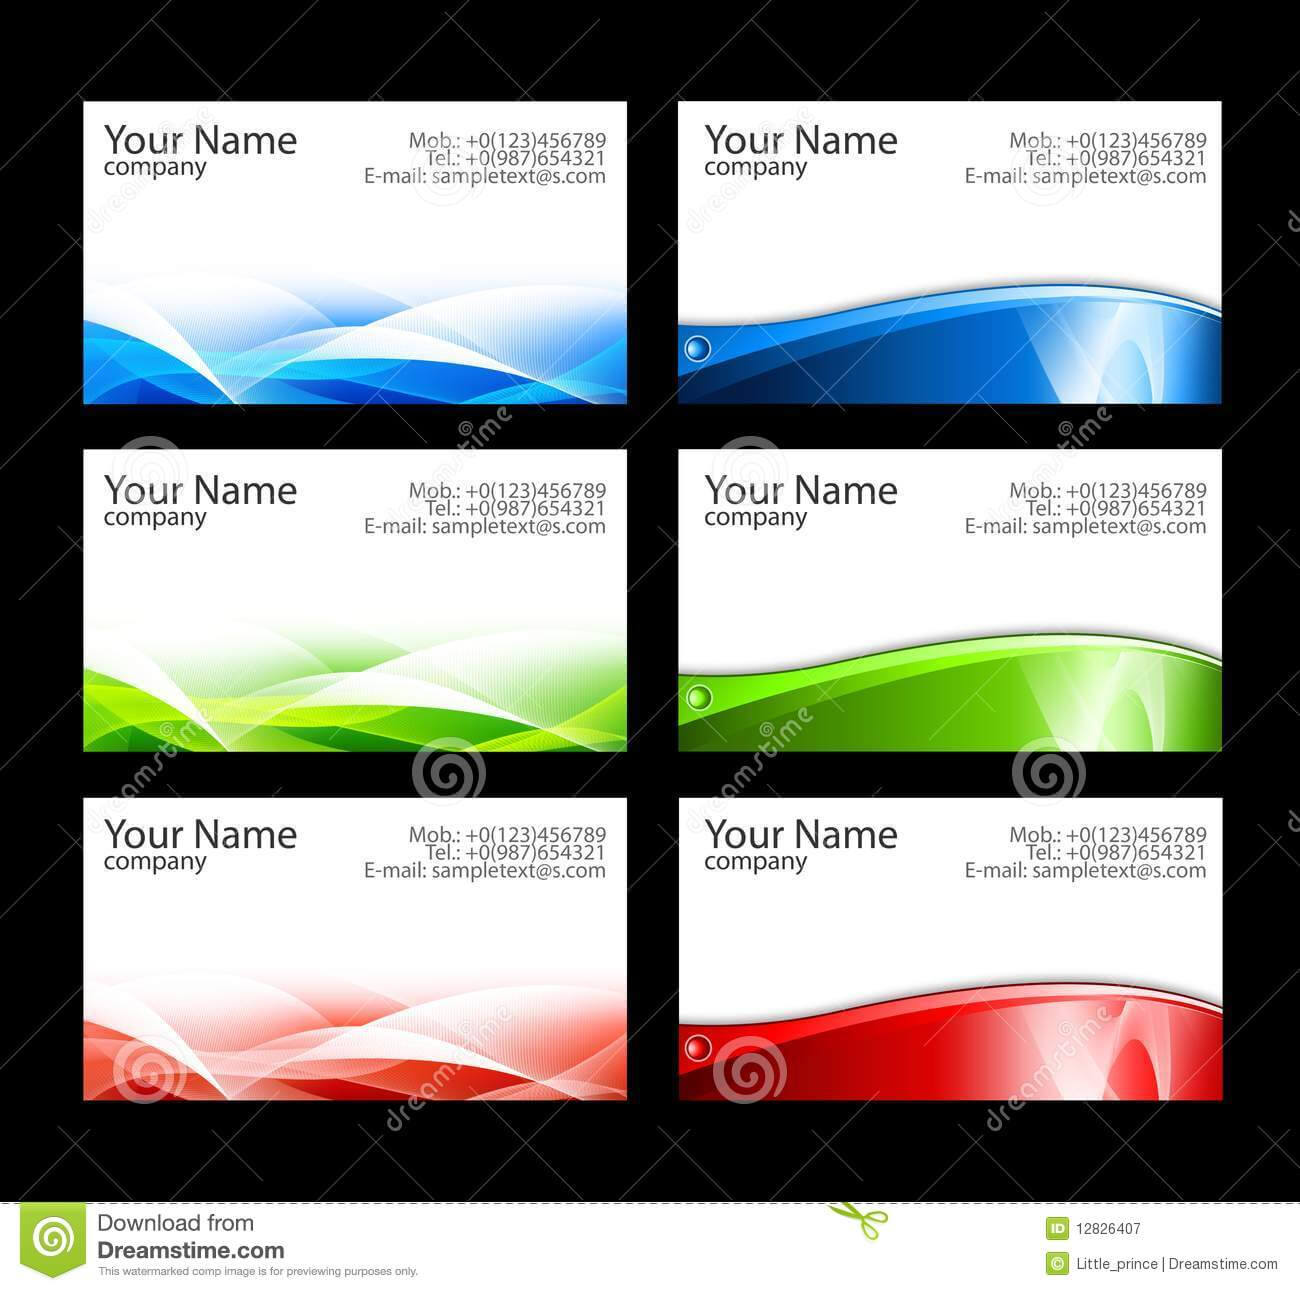 15 Free Avery Business Card Templates Images - Free Business For Call Card Templates